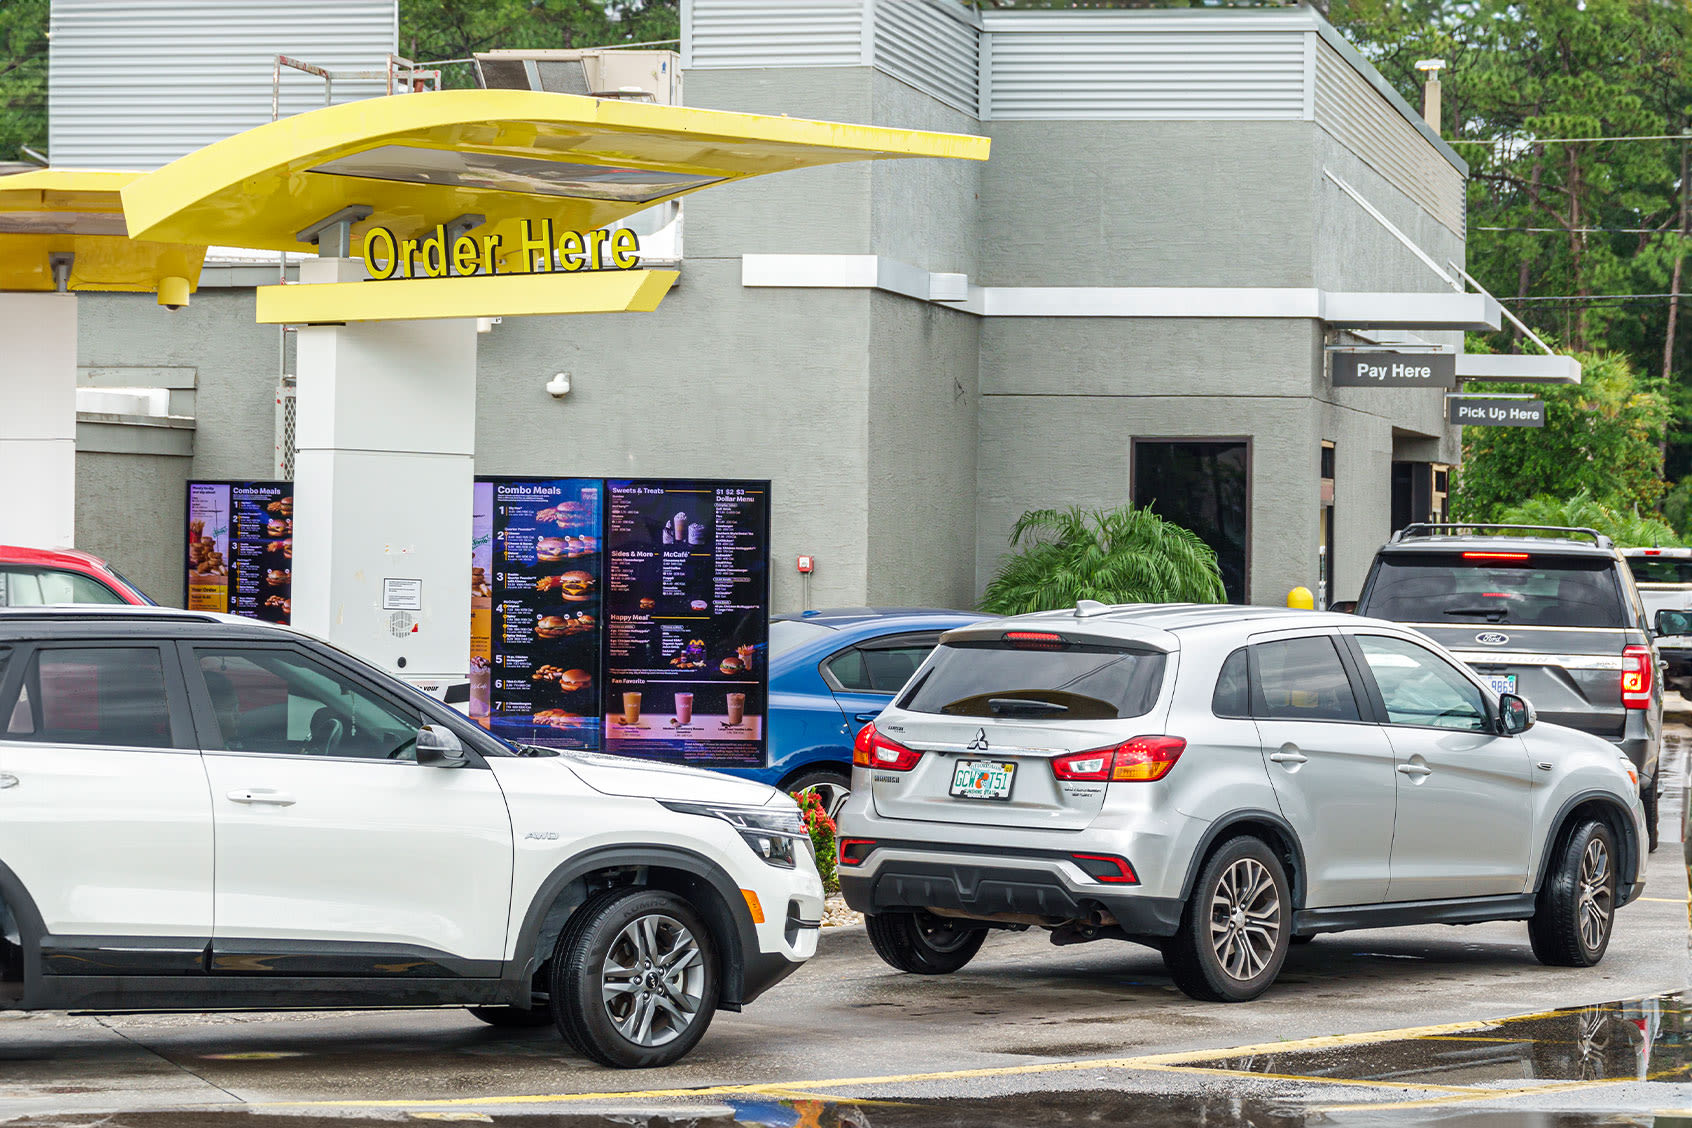 McDonald’s has officially ended its AI drive-thru following several public mishaps